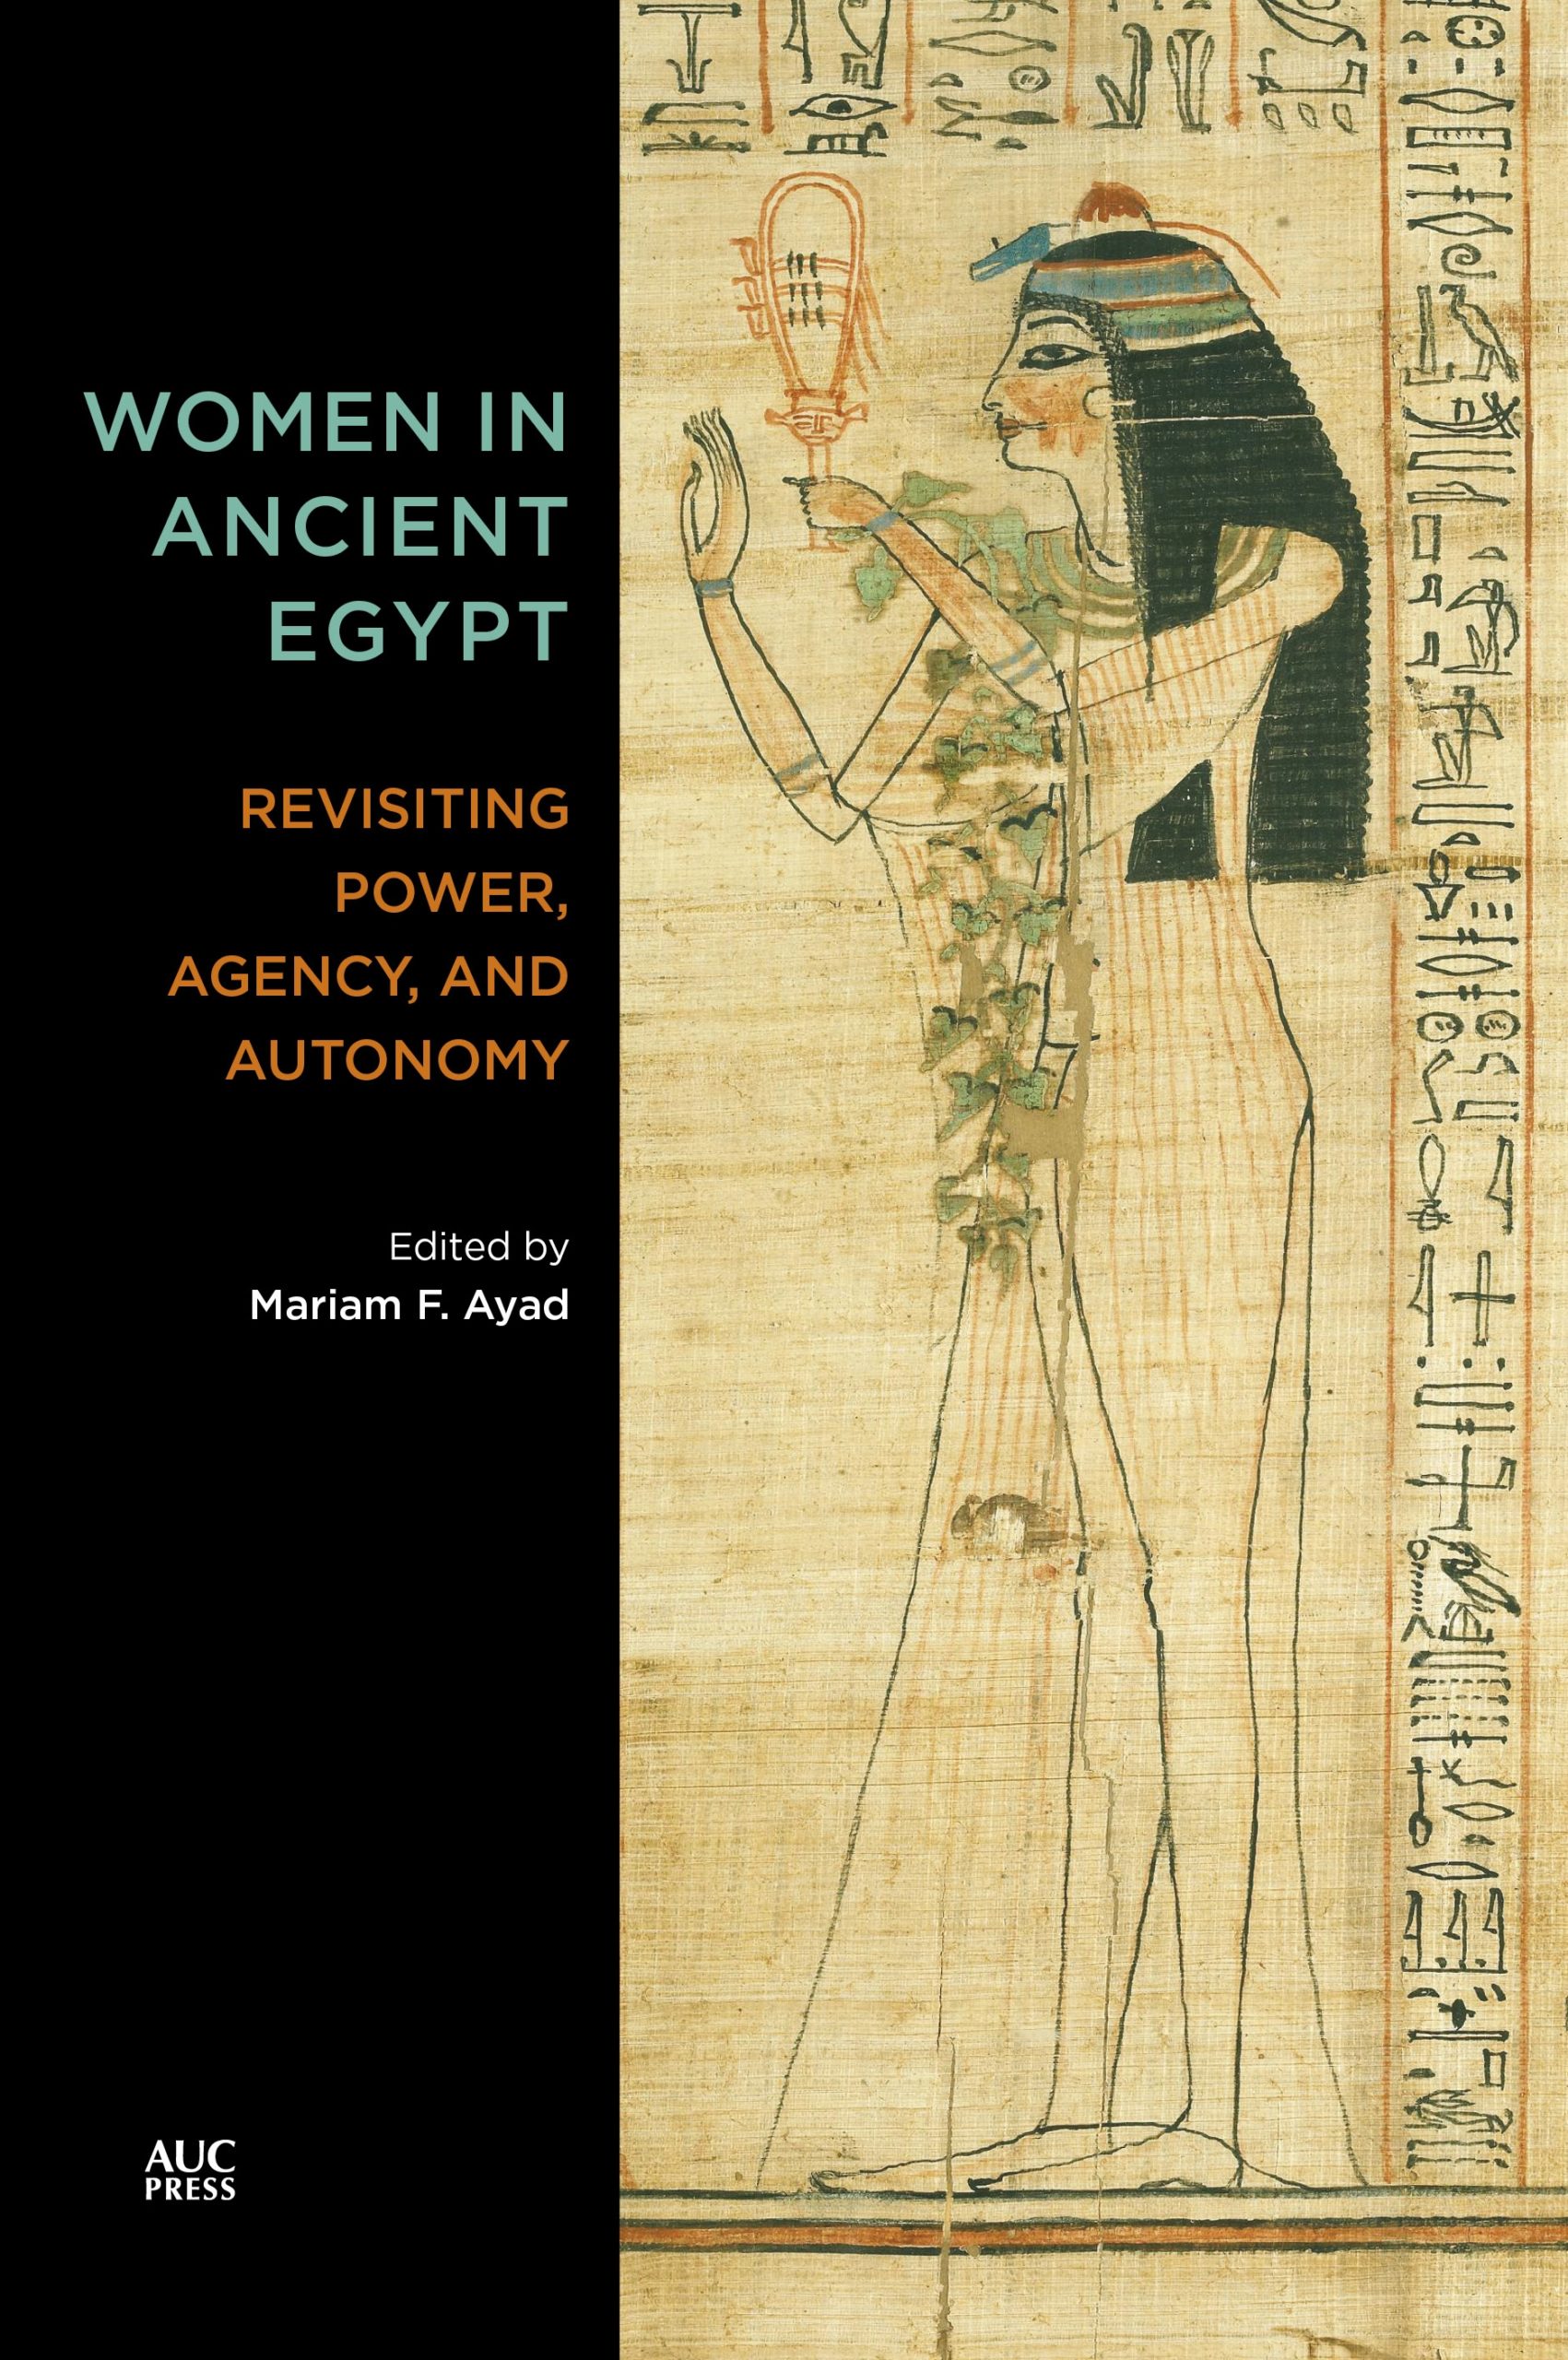 Book Cover- Women in Ancient Egypt